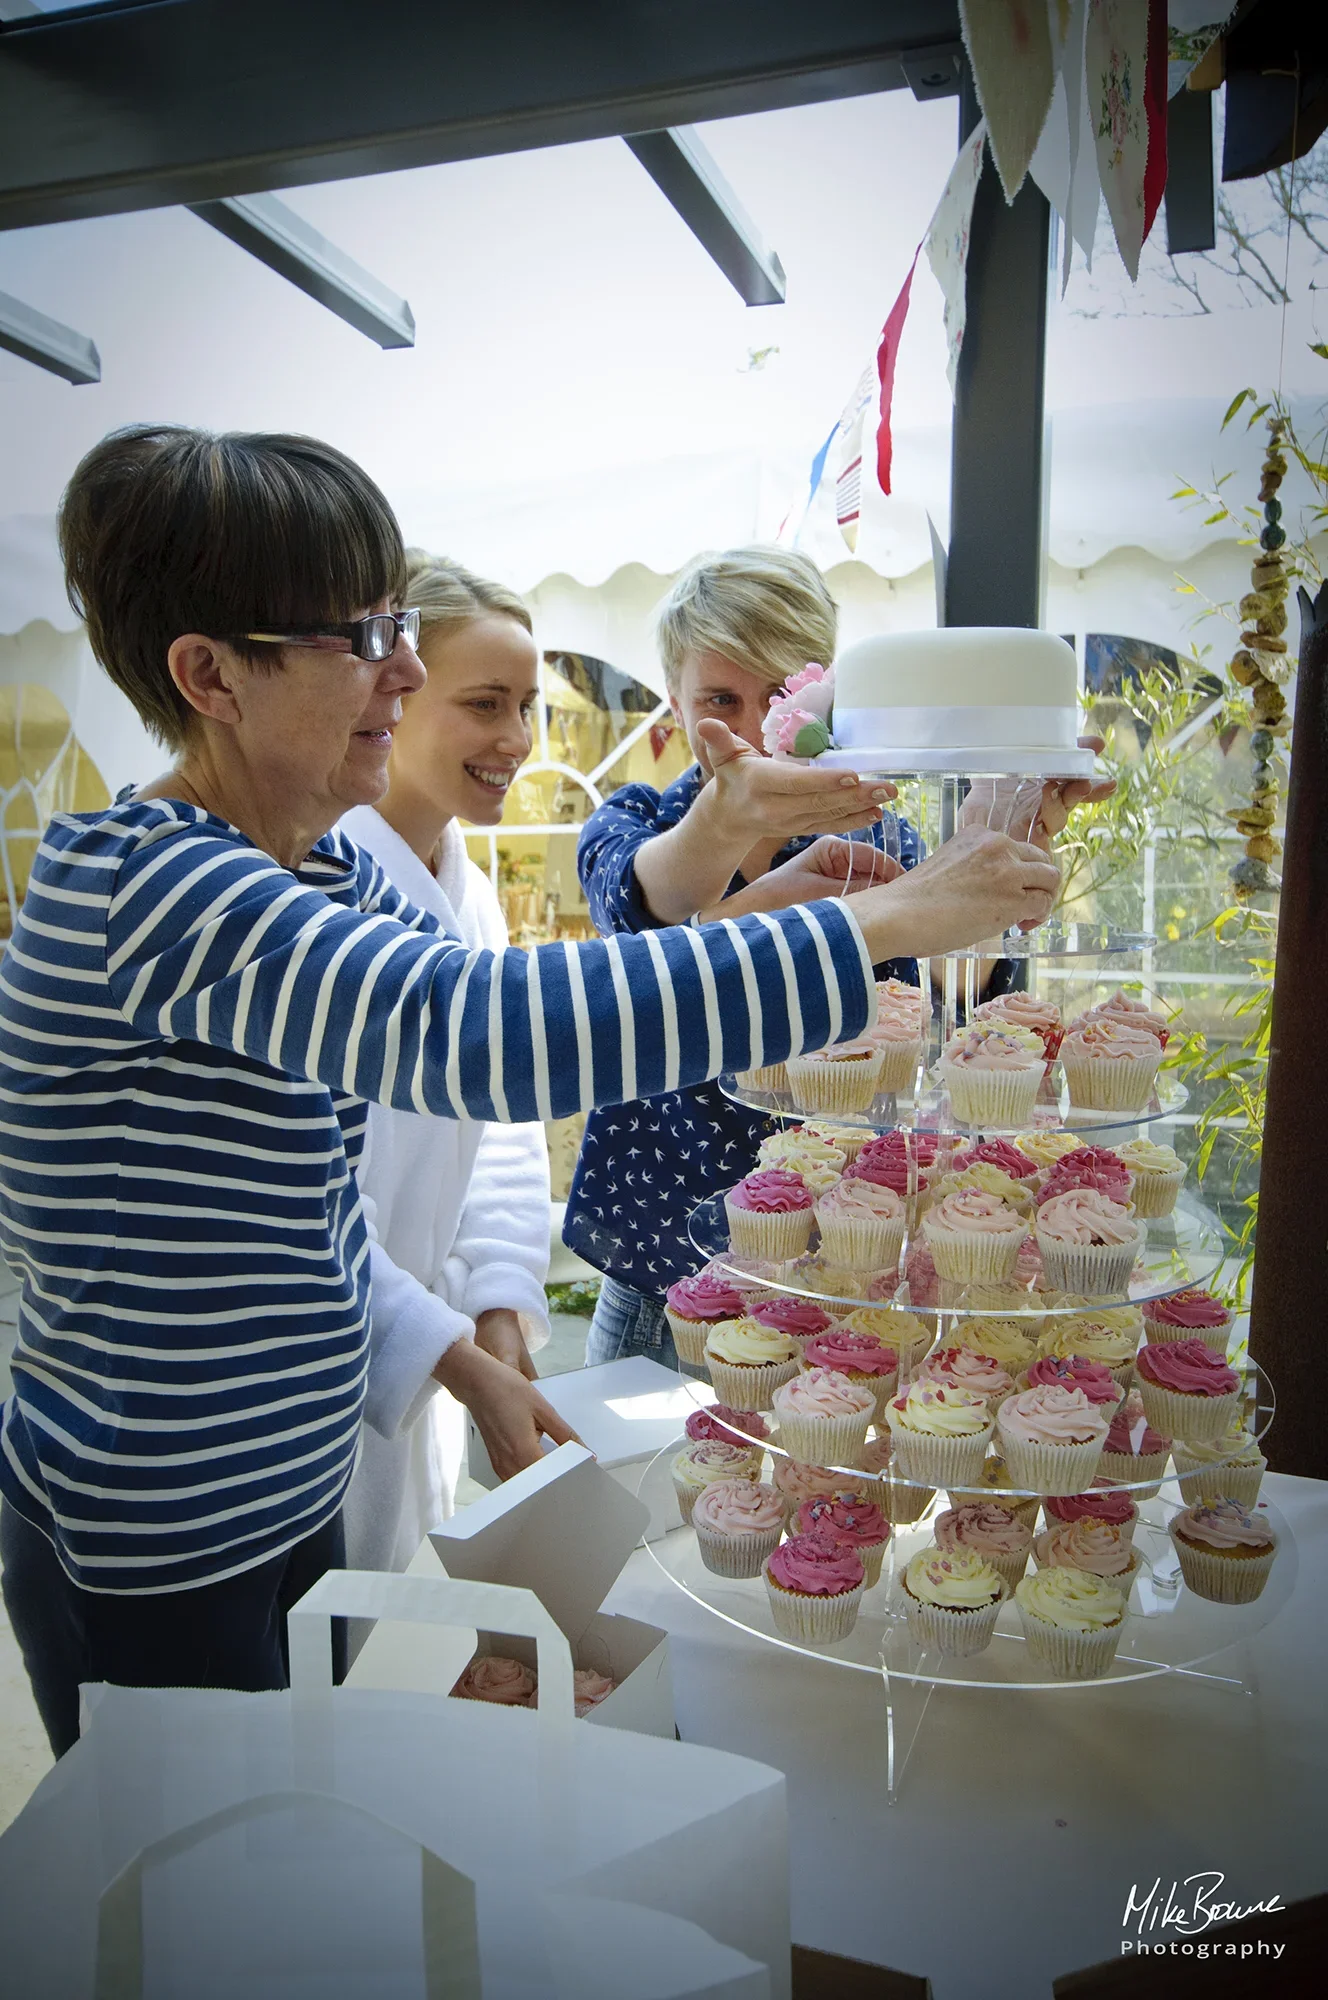 Three women placing top tier of a wedding cake on a display stand